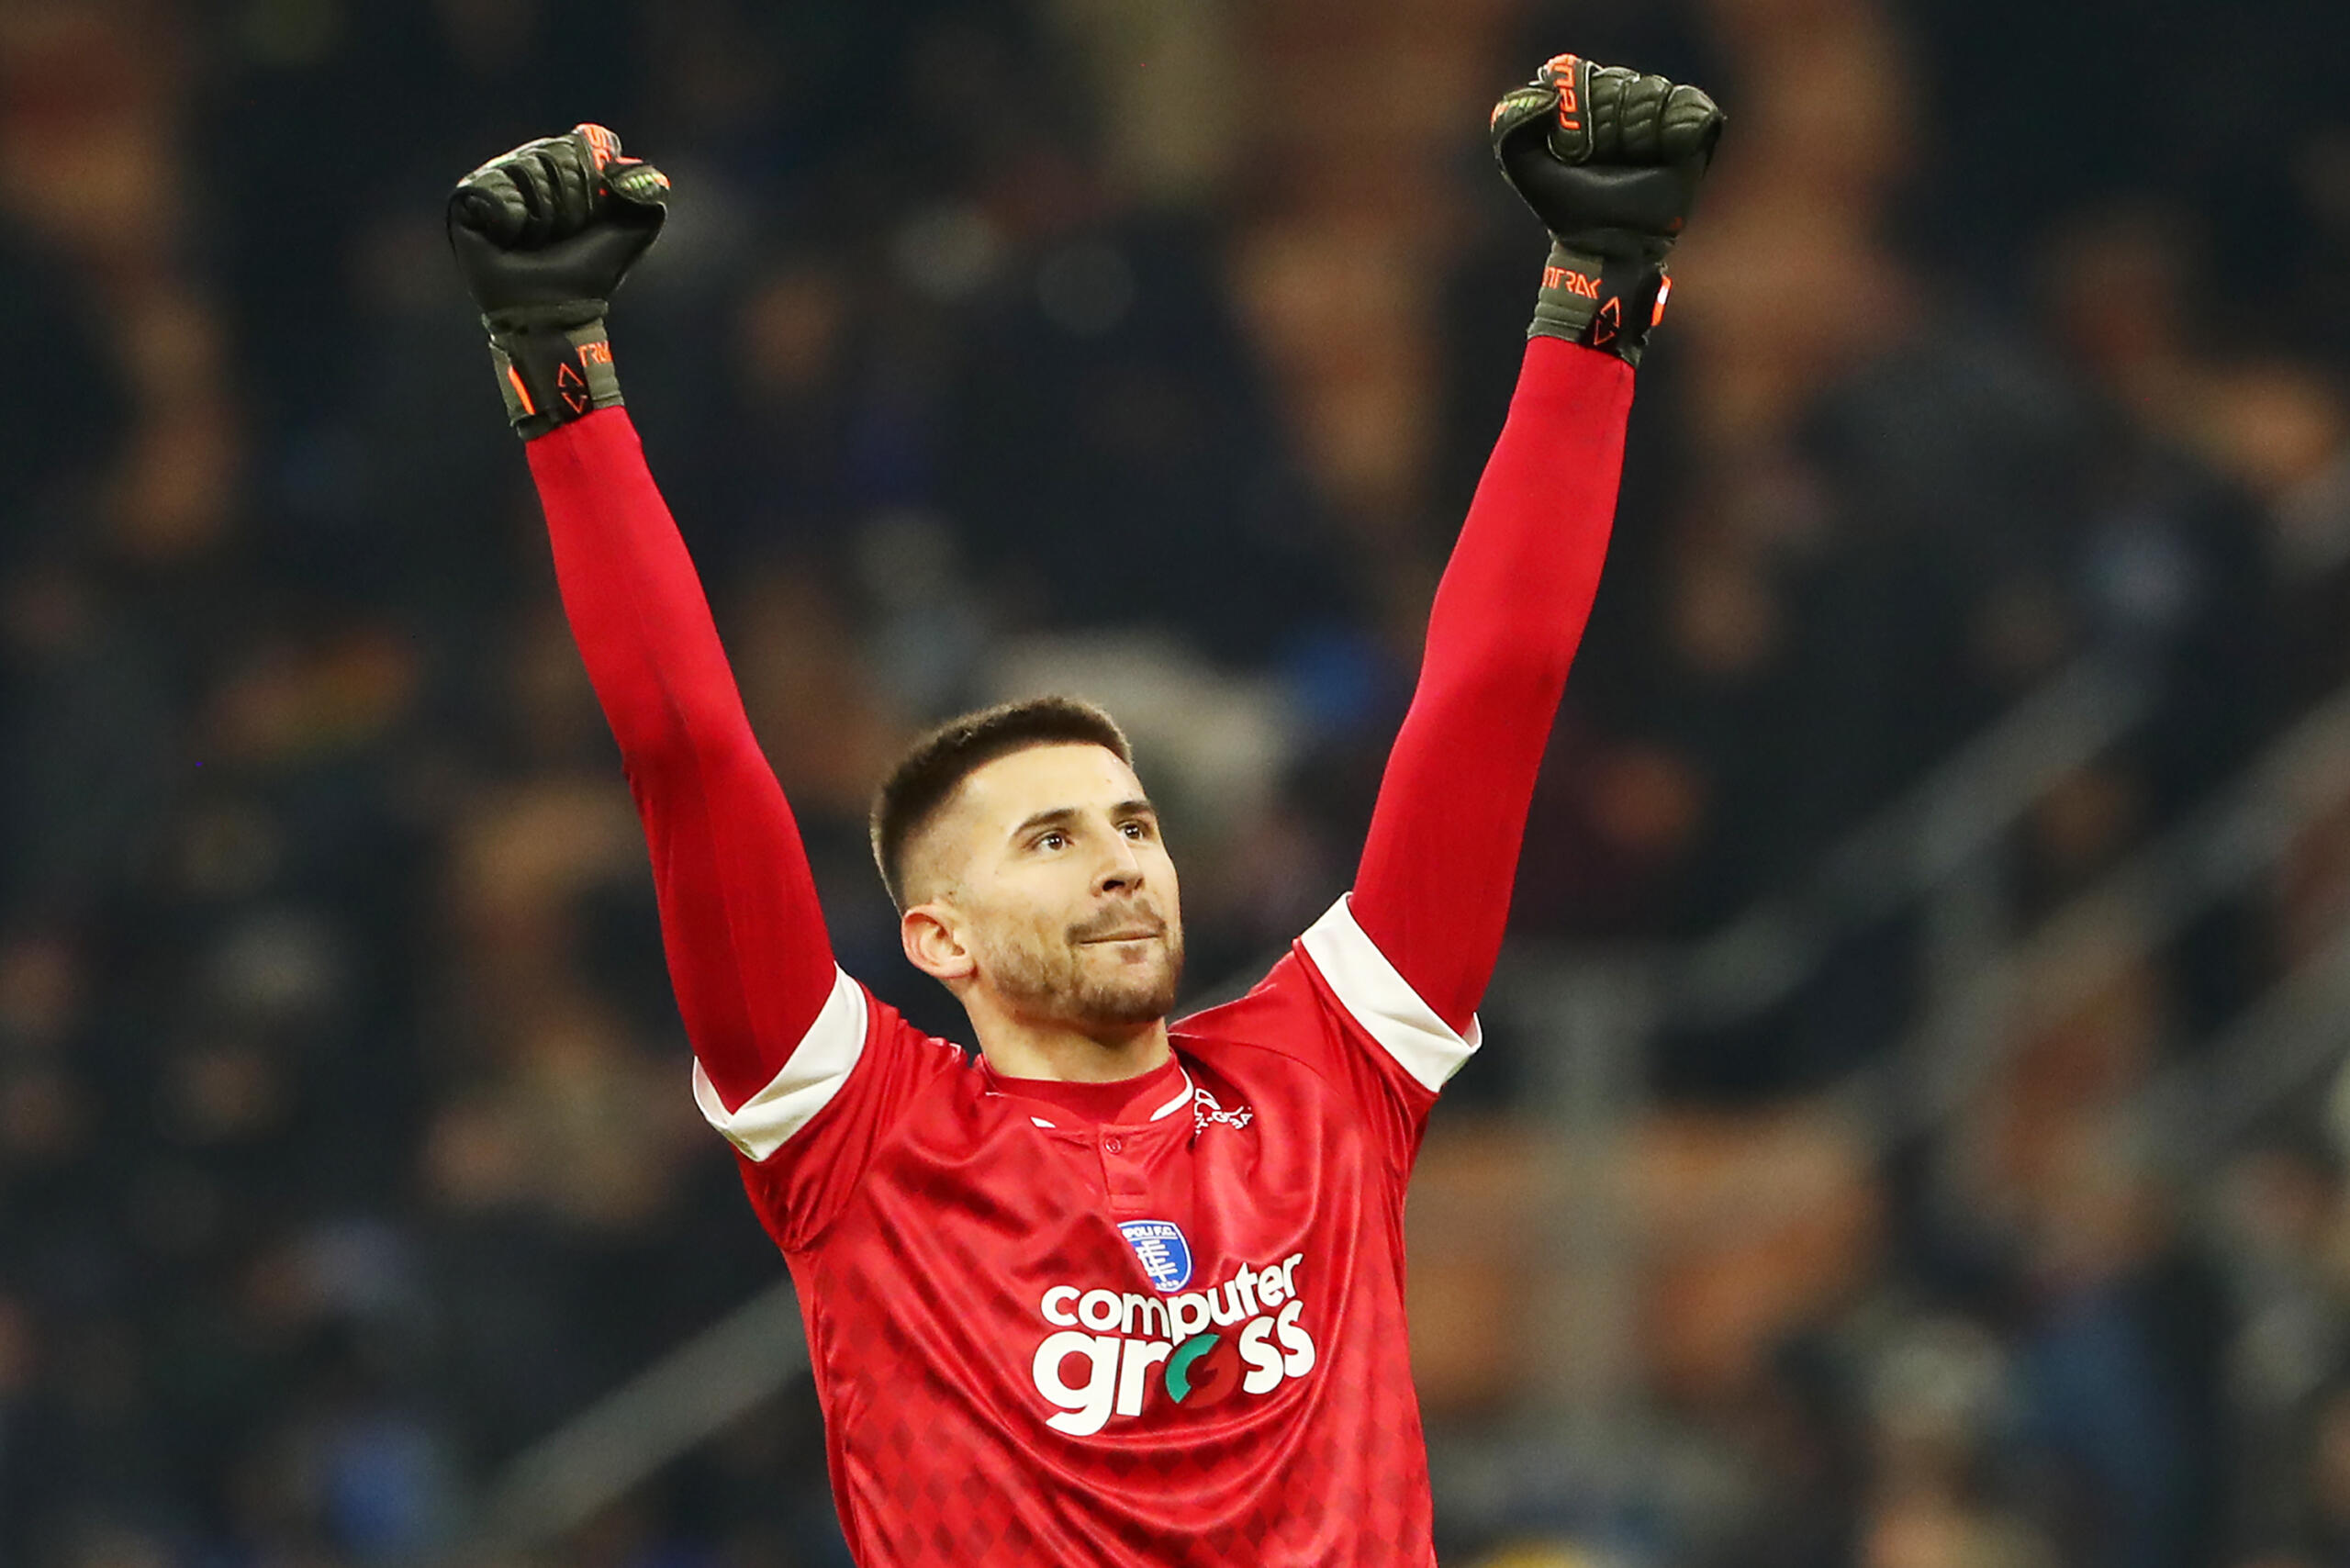 Tottenham have emerged as the frontrunners to acquire Gugliemo Vicario from Empoli. The goalkeeper had long been touted as Inter’s top target.